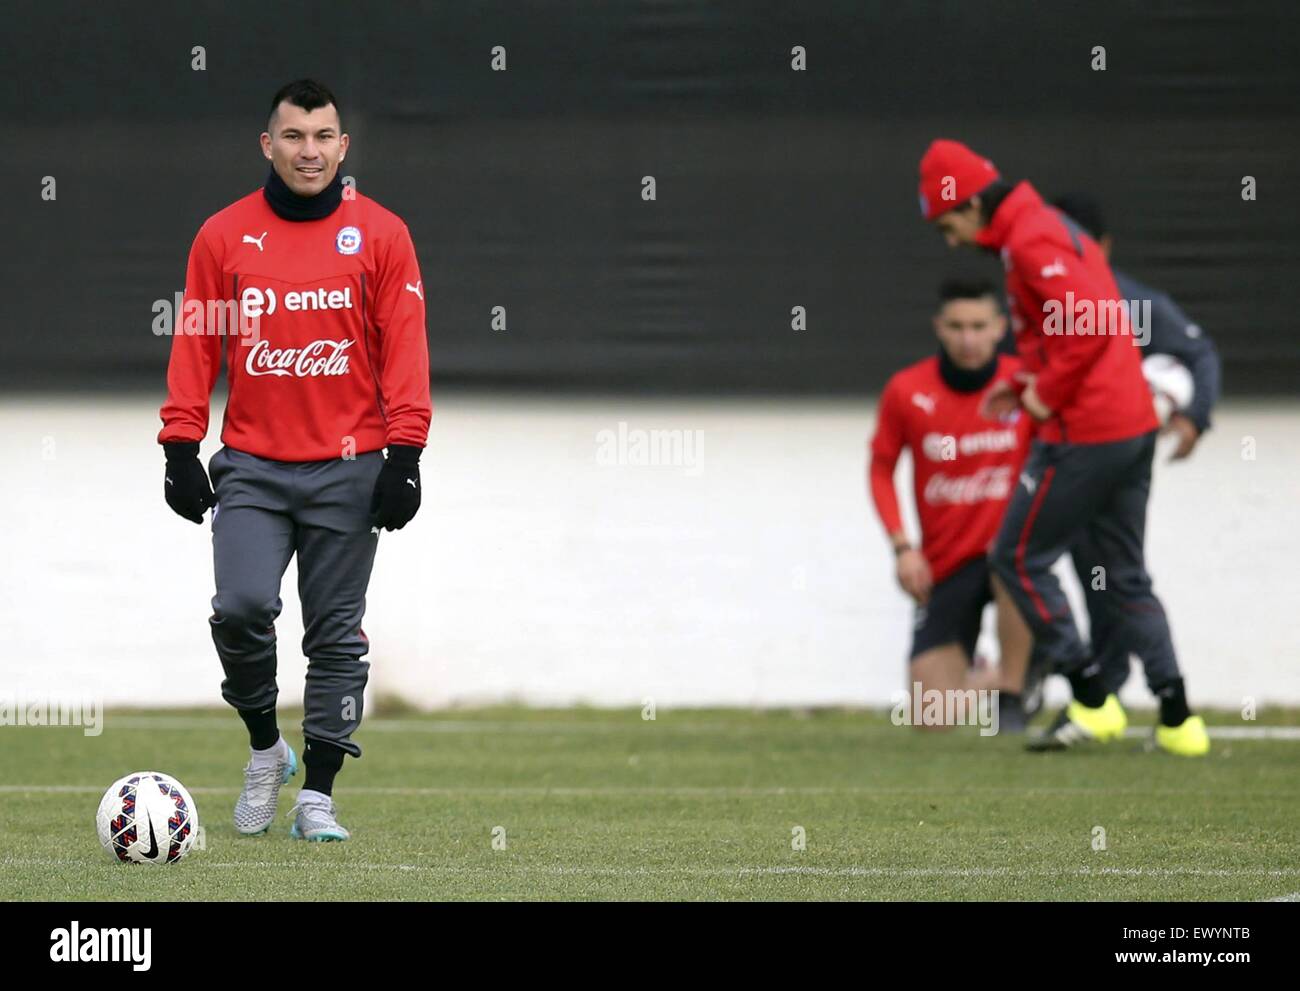 Santiago, Chile. 2nd July, 2015. Chile's Gary Medel (L) attends a training session in Santiago, Chile, on July 2, 2015. Chile will face Argentina in the final match of the America Cup Chile 2015 on Saturday. © Juan Roleri/TELAM/Xinhua/Alamy Live News Stock Photo